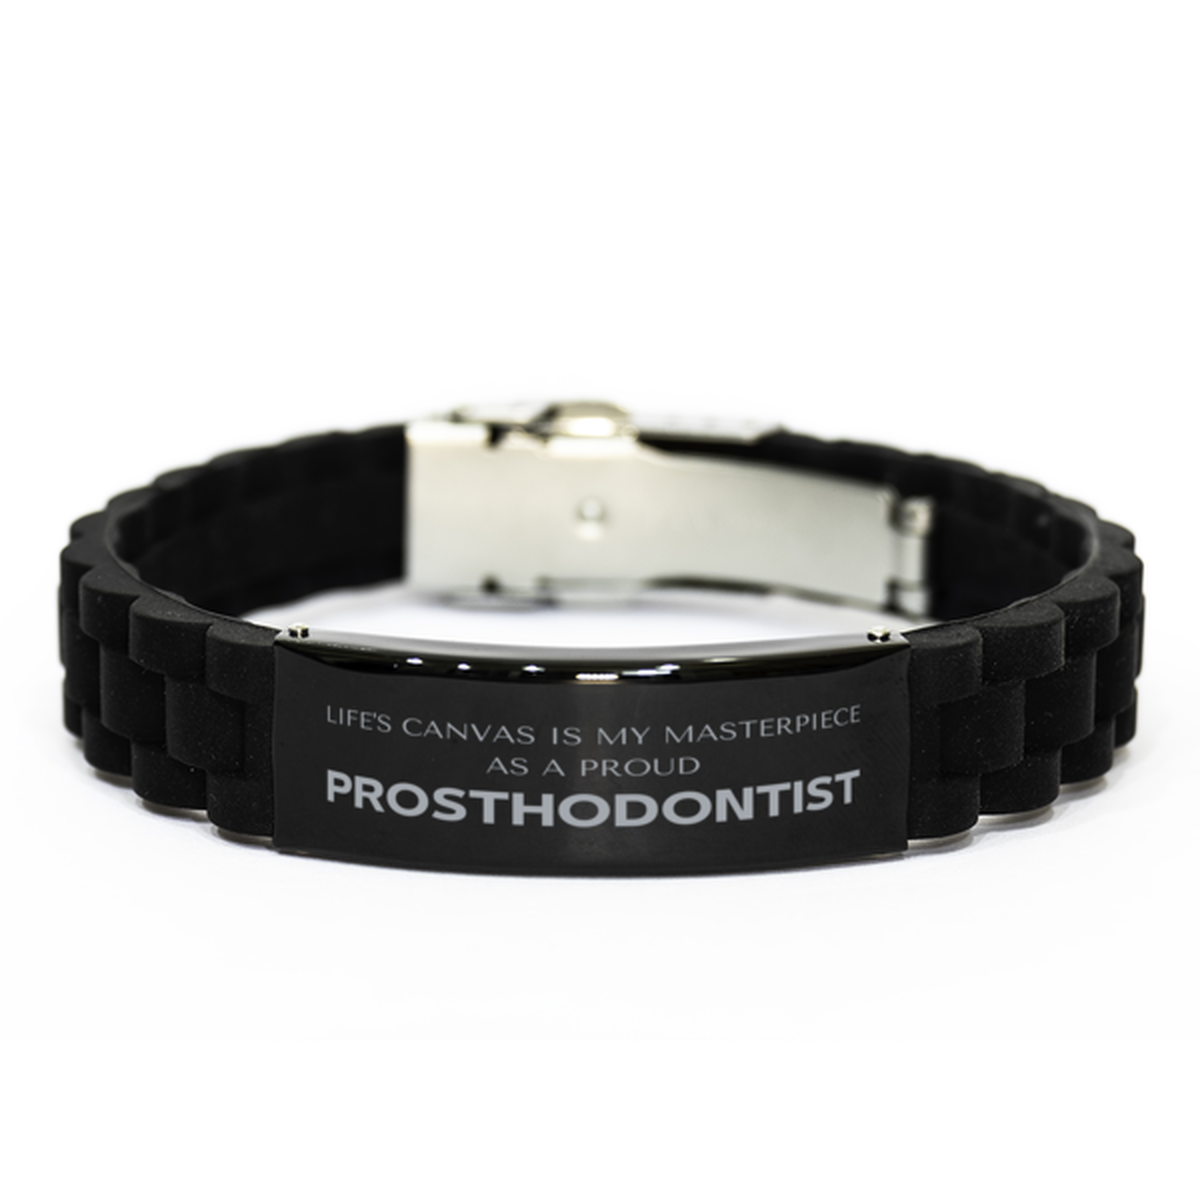 Proud Prosthodontist Gifts, Life's canvas is my masterpiece, Epic Birthday Christmas Unique Black Glidelock Clasp Bracelet For Prosthodontist, Coworkers, Men, Women, Friends